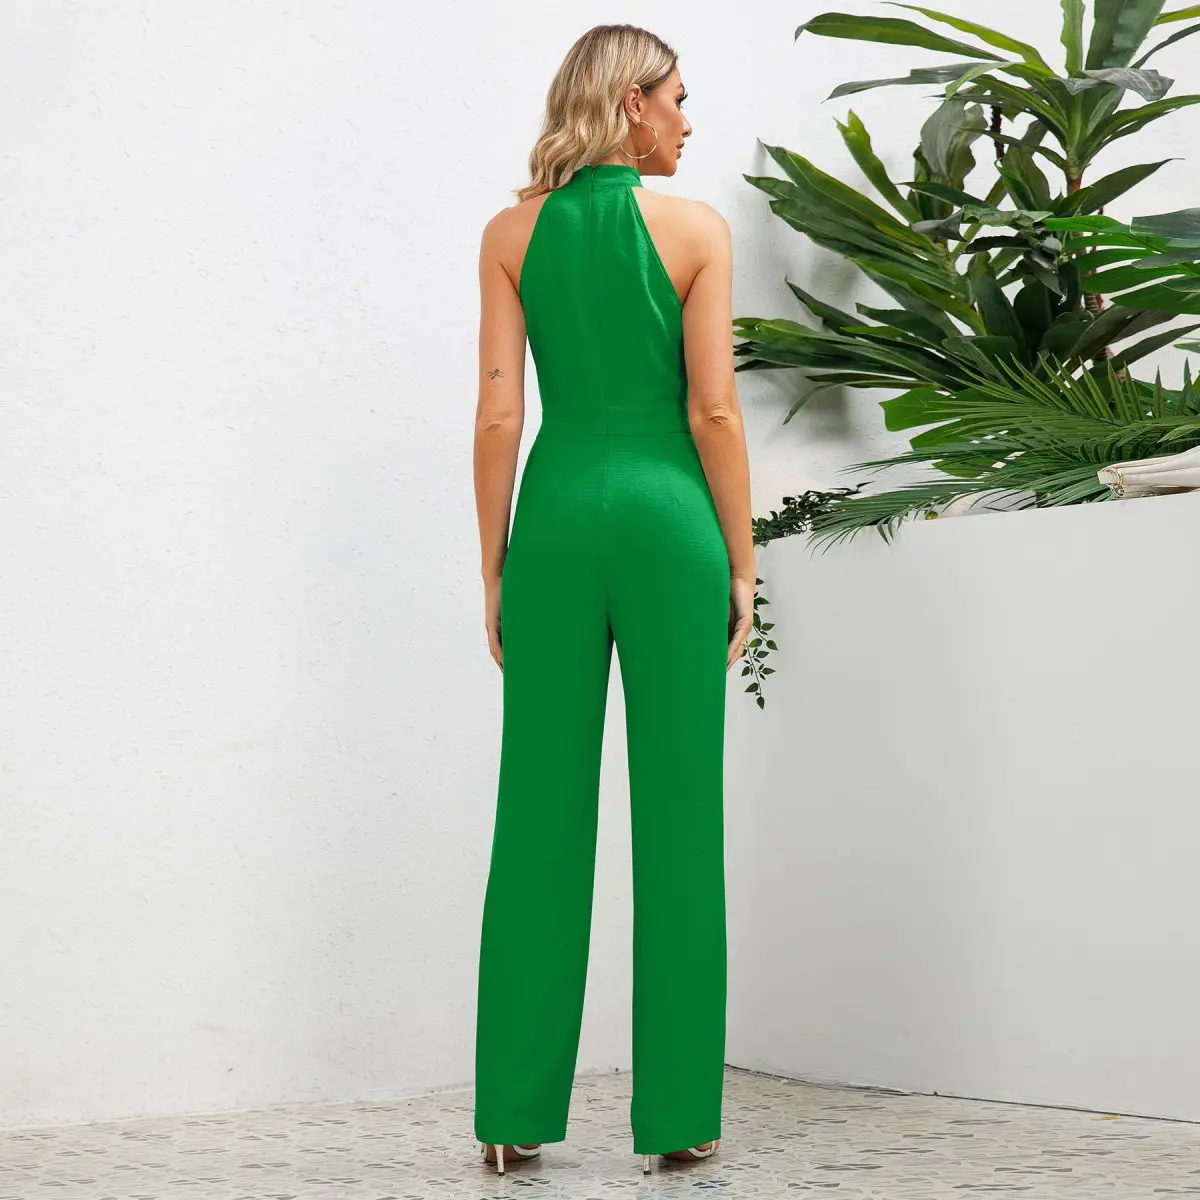 Sexy Slim Sleeveless Stand Up Collar Bowknot Straight Long Pants Jumpsuit in Jumpsuits & Rompers